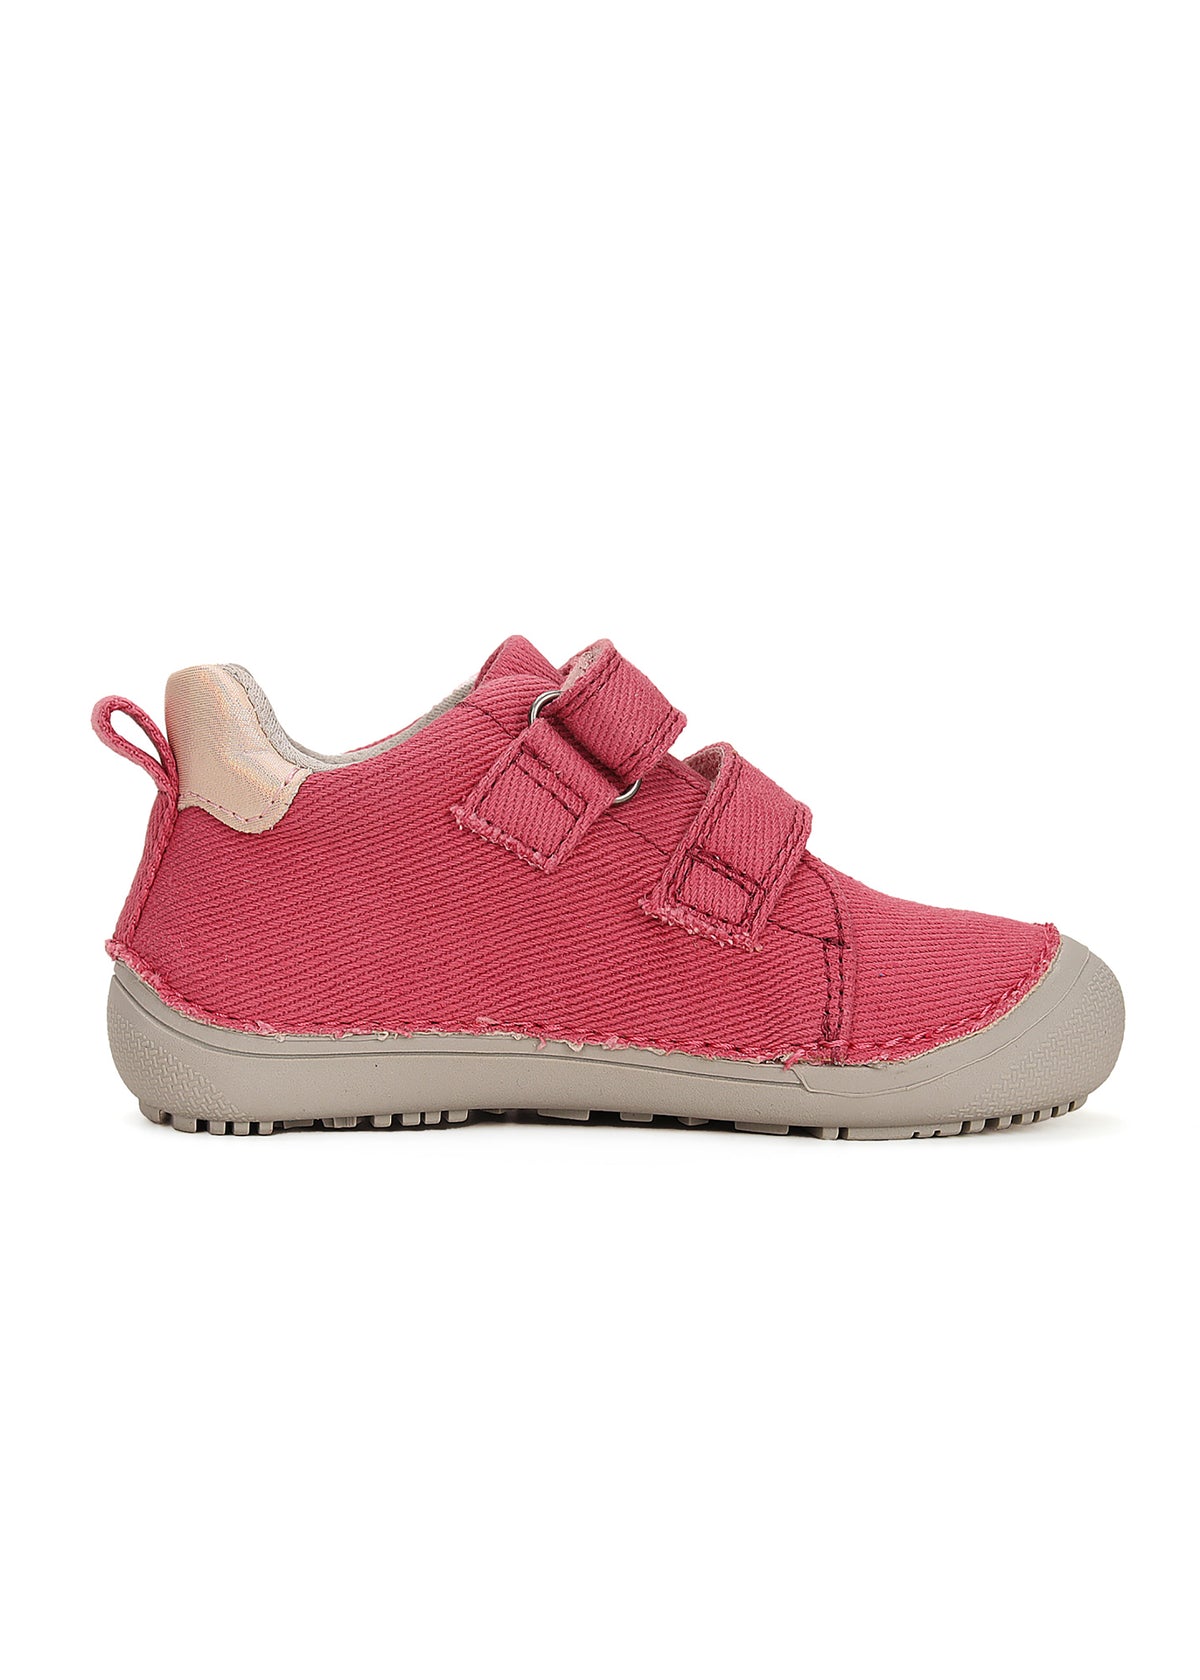 Children's barefoot sneakers - red canvas, pink lightning